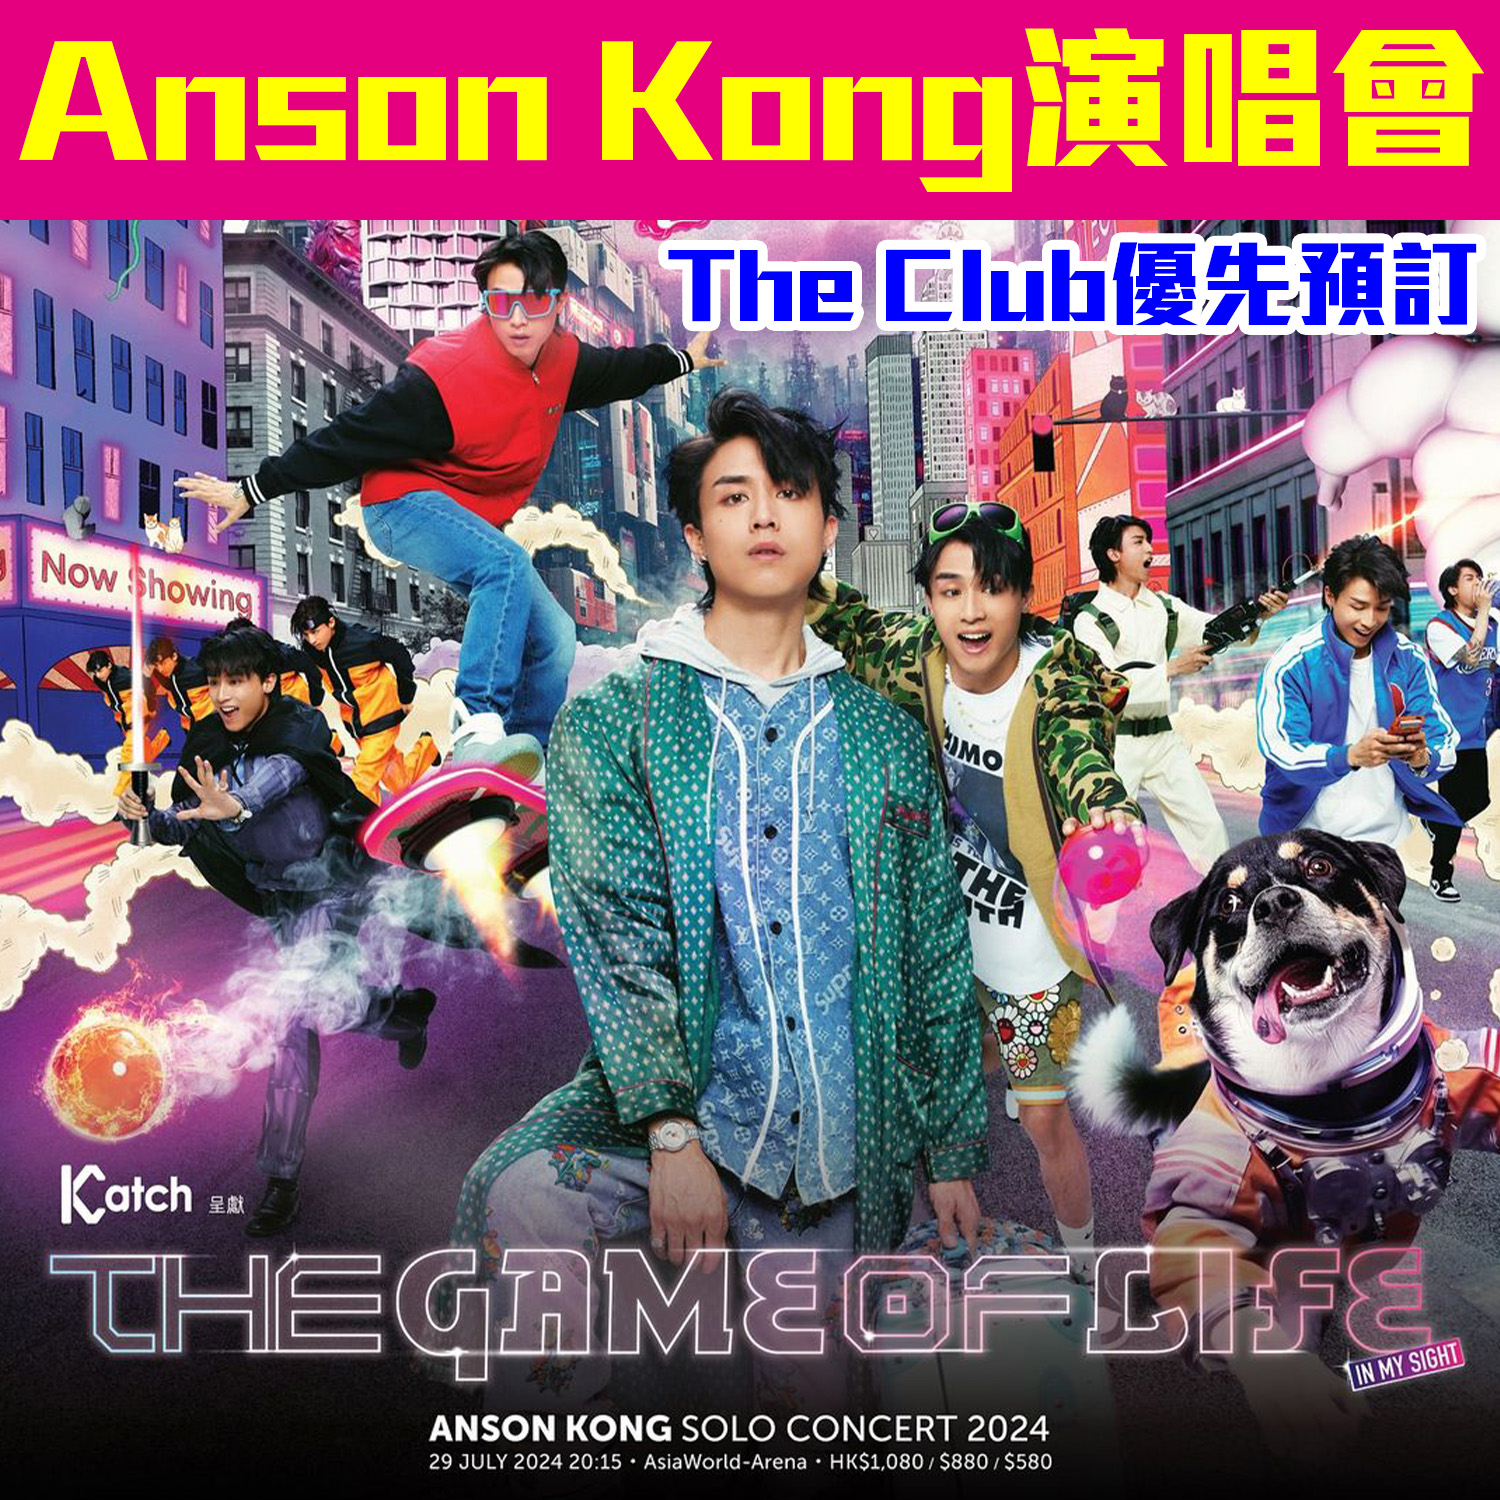 【AK演唱會】The Club優先預訂！申請渣打信用卡/簽賬可抽飛！ANSON KONG “THE GAME OF LIFE” IN MY SIGHT SOLO CONCERT 2024